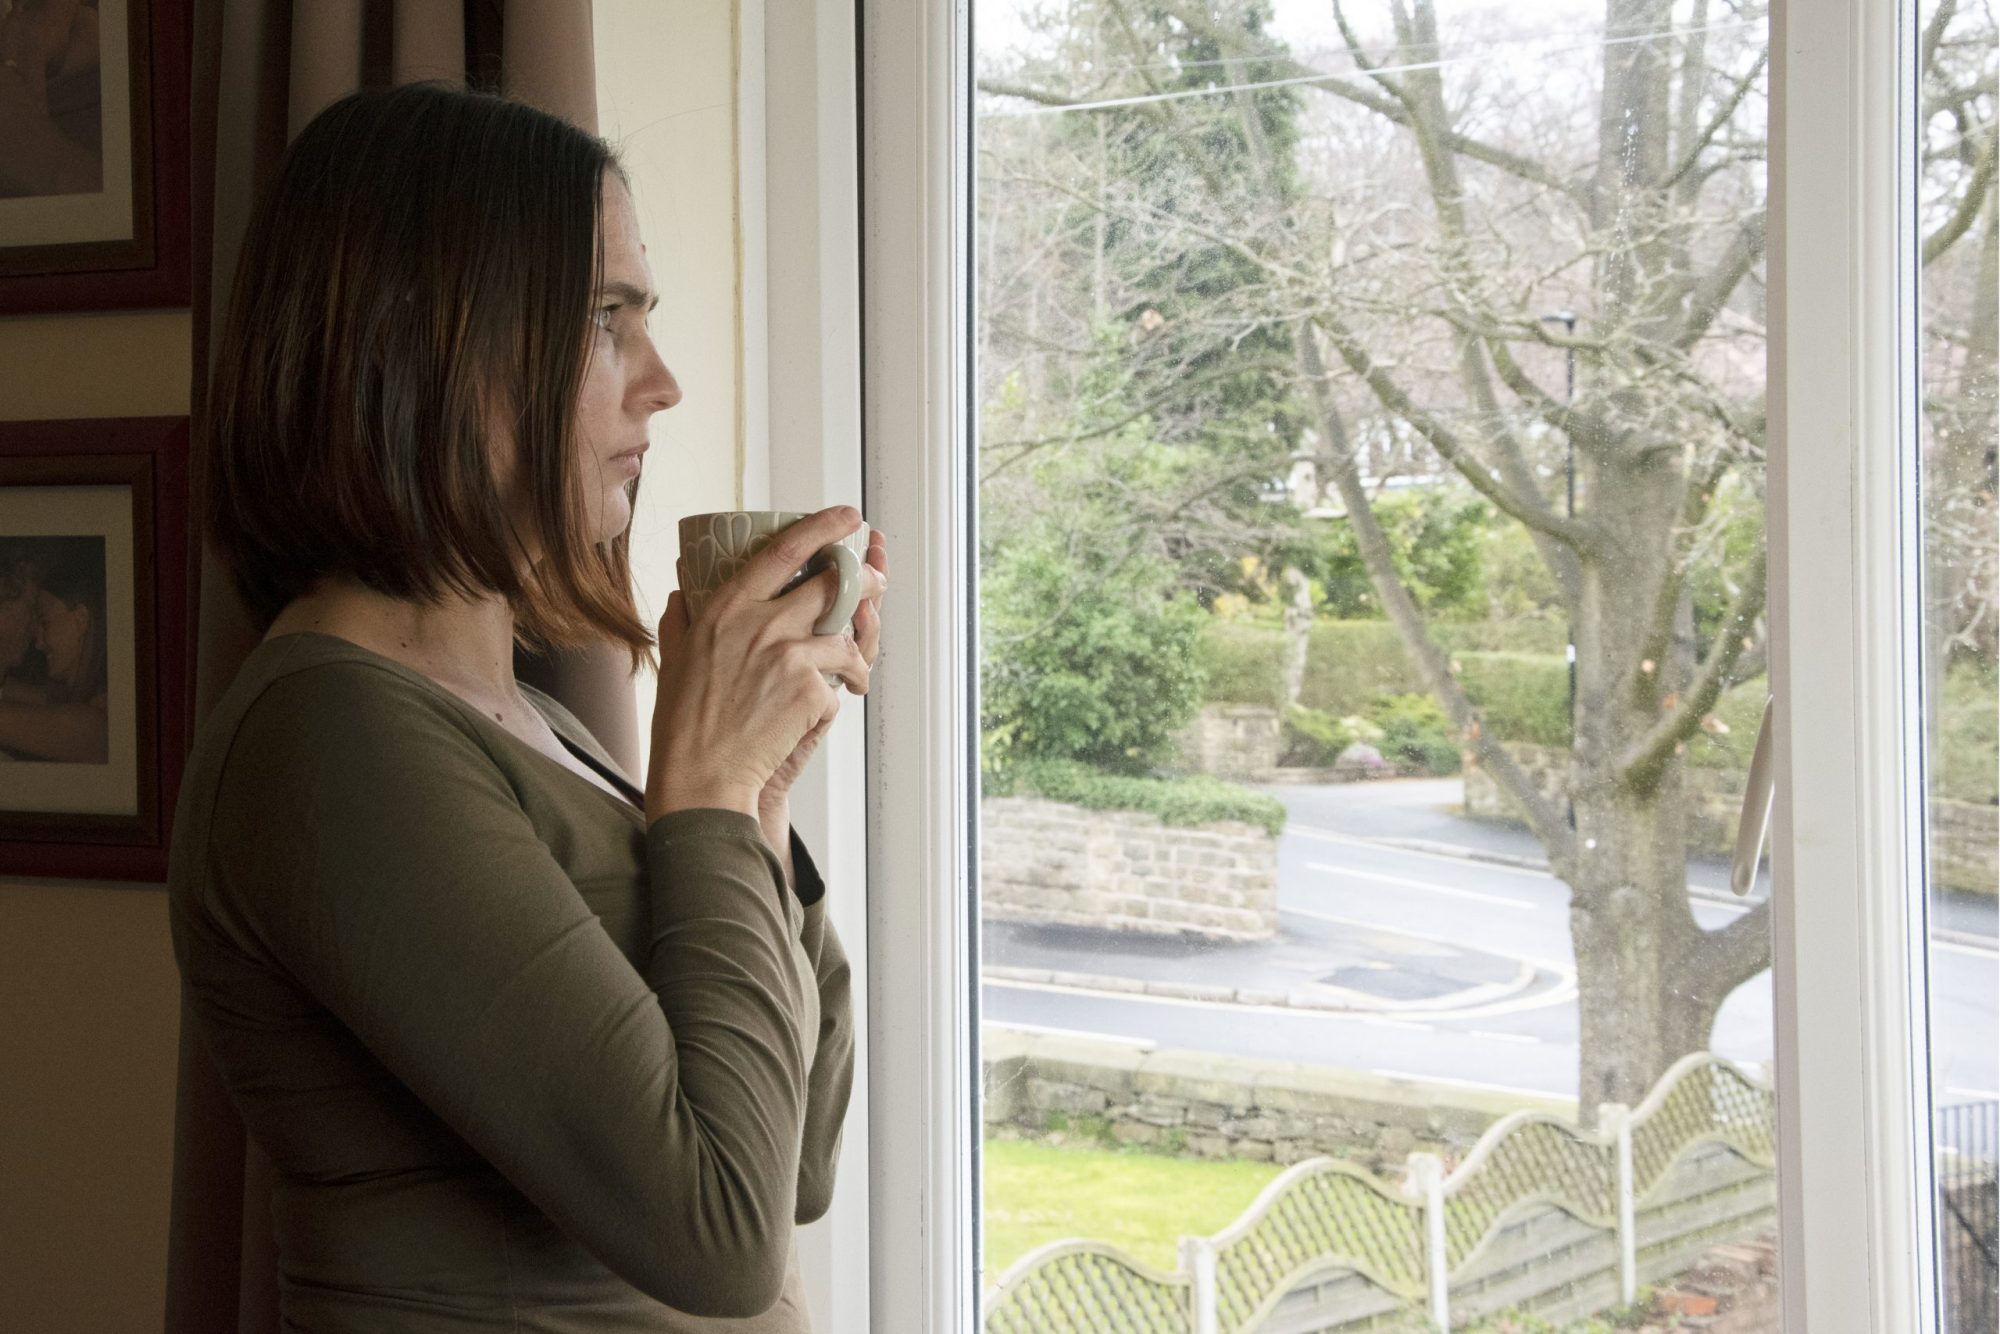 Woman looking out window holding mug, when deciding to end marriage call Chicago divorce lawyers for help with divorce process.